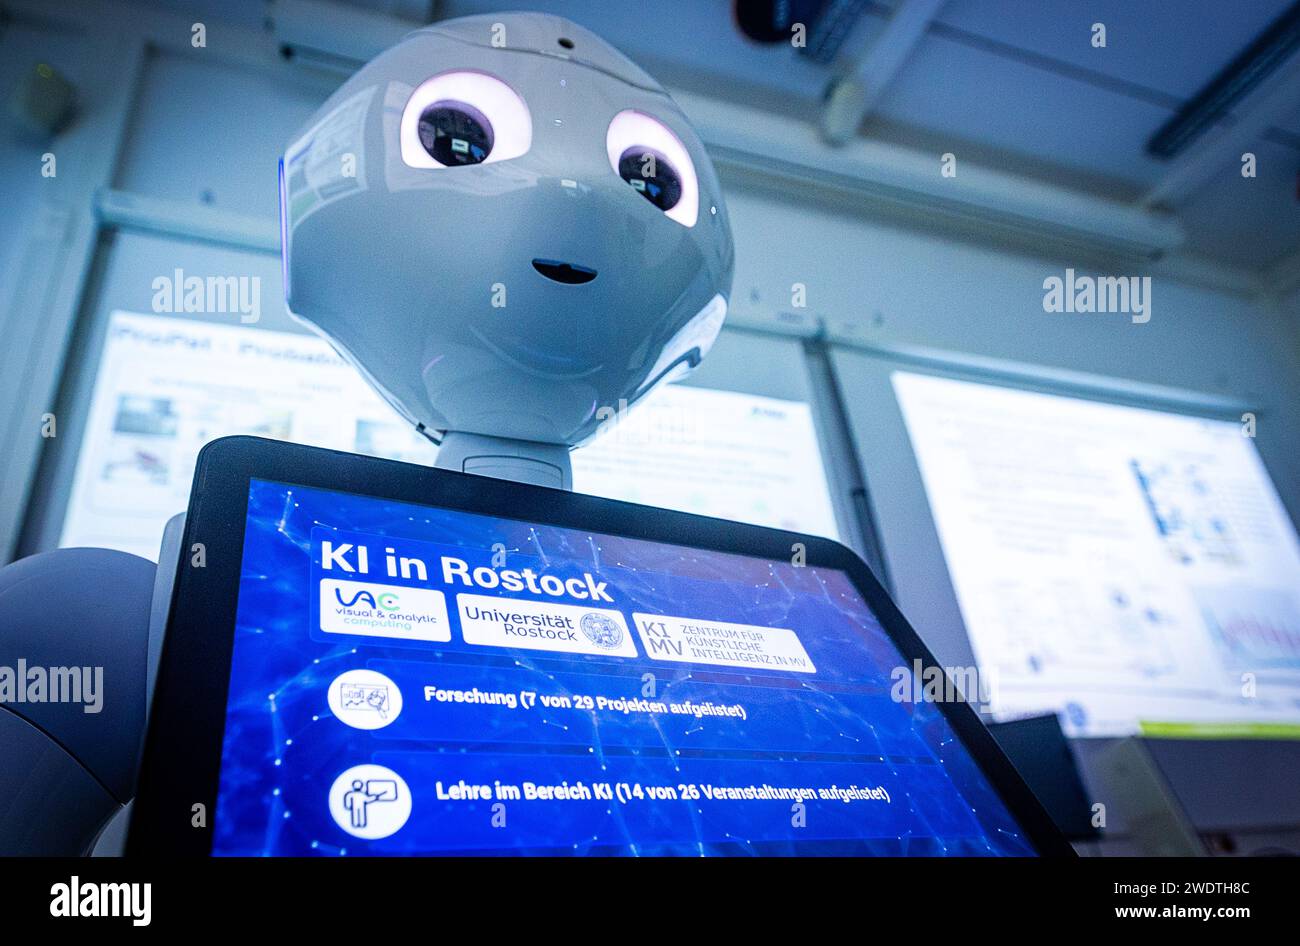 Rostock, Germany. 22nd Jan, 2024. The words 'AI in Rostock' can be read on the display of the Pepper robot. The robot, manufactured by the company Aldebaran Robotics, was programmed by the Rostock scientists for the care of stroke patients. The Minister of Science of Mecklenburg-Vorpommern learned about the current research work during a visit to the Center for Artificial Intelligence (AI) in Mecklenburg-Vorpommern at the University of Rostock. Credit: Jens Büttner/dpa/Alamy Live News Stock Photo